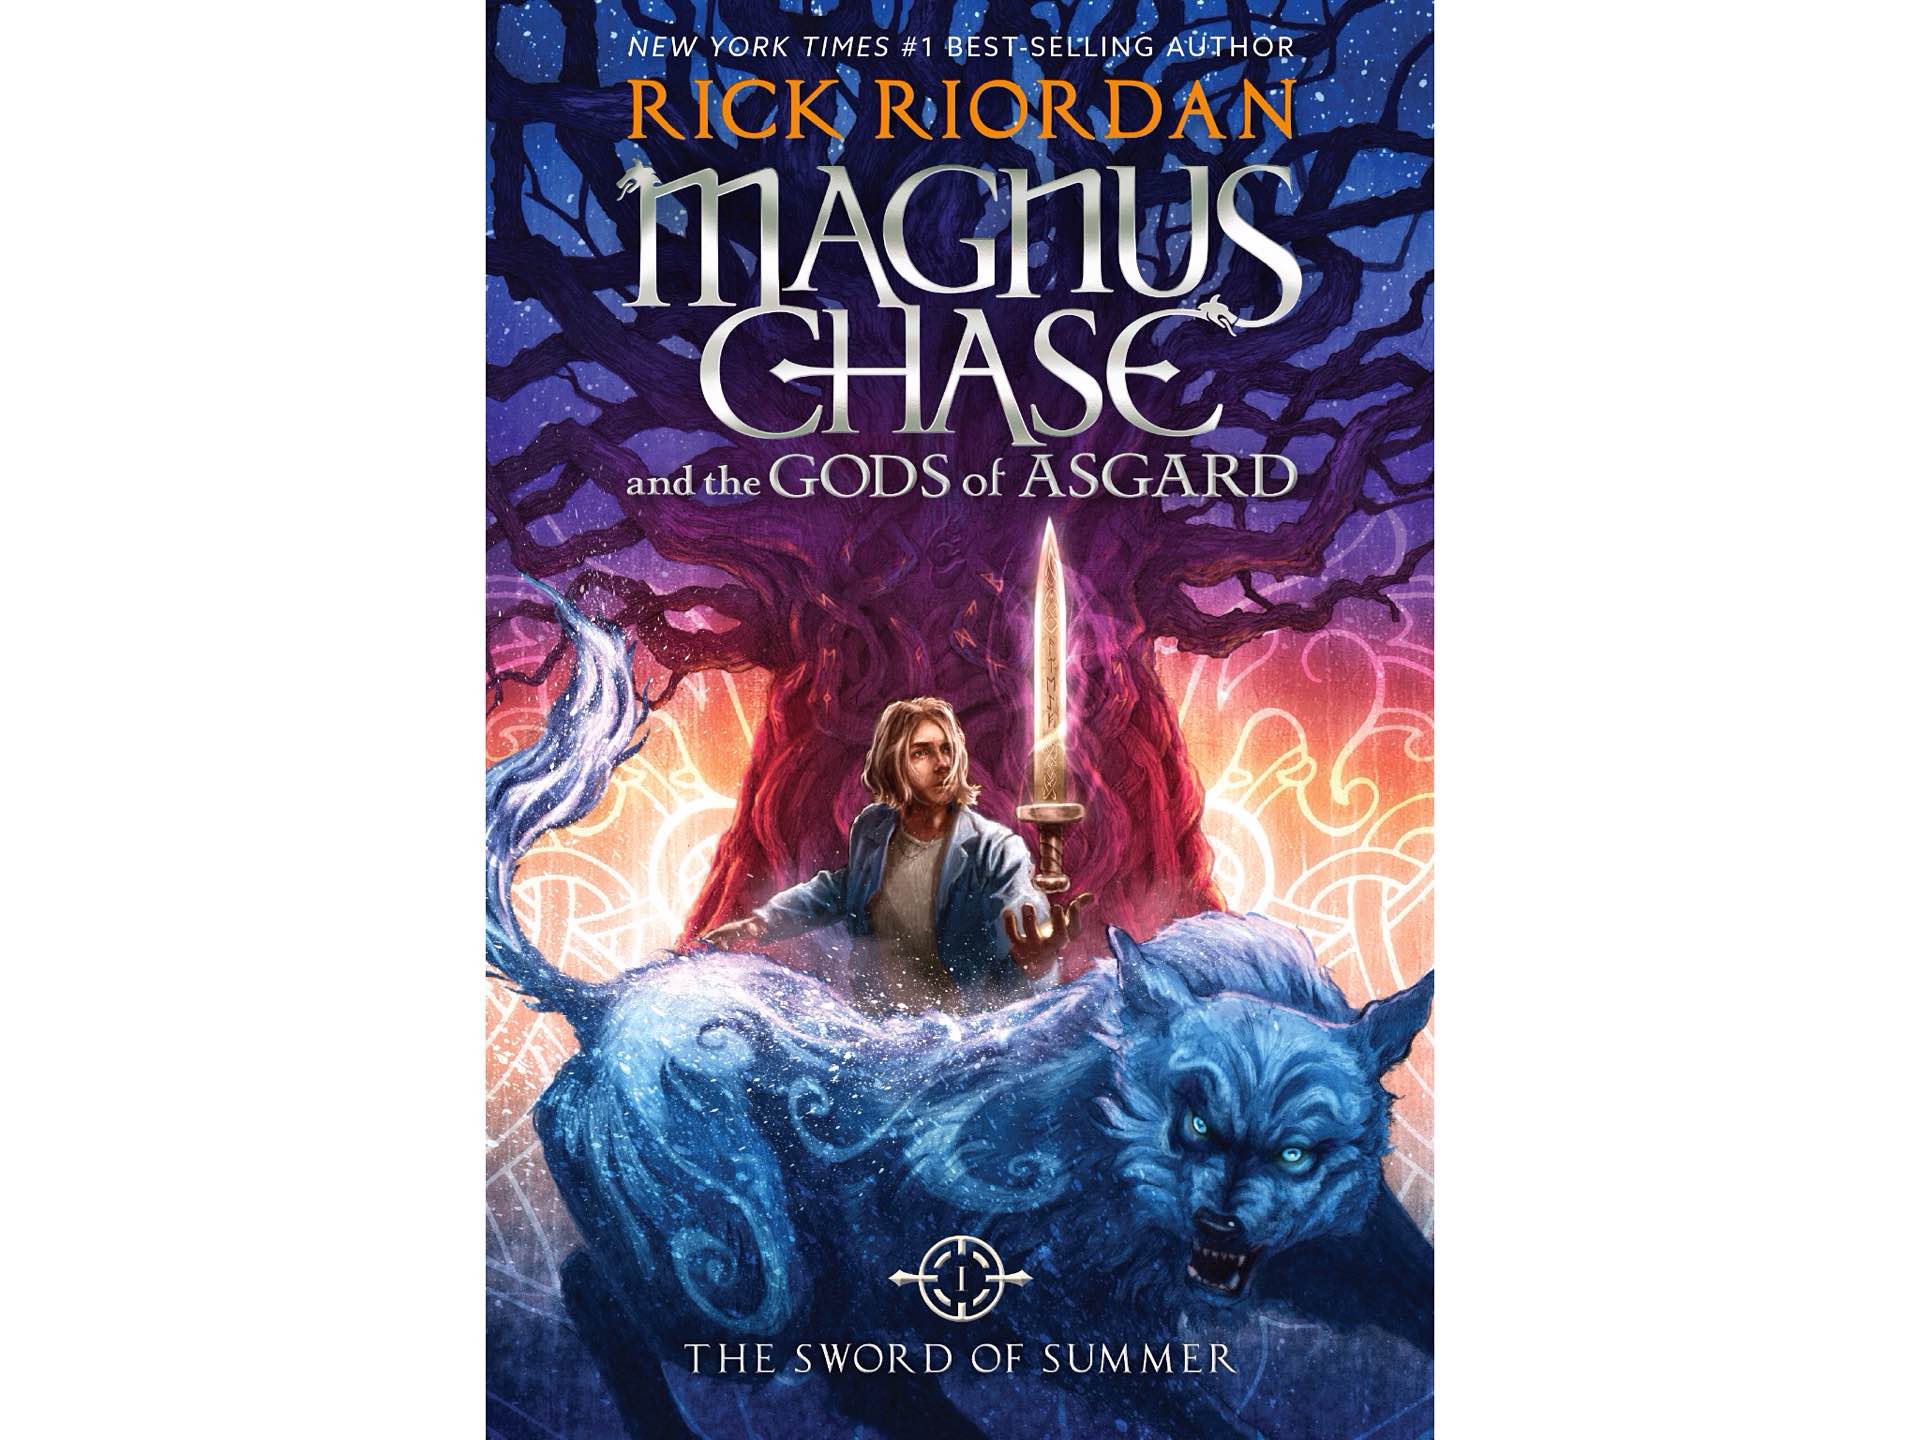 Magnus Chase and the Gods of Asgard: The Sword of Summer by Rick Riordan.